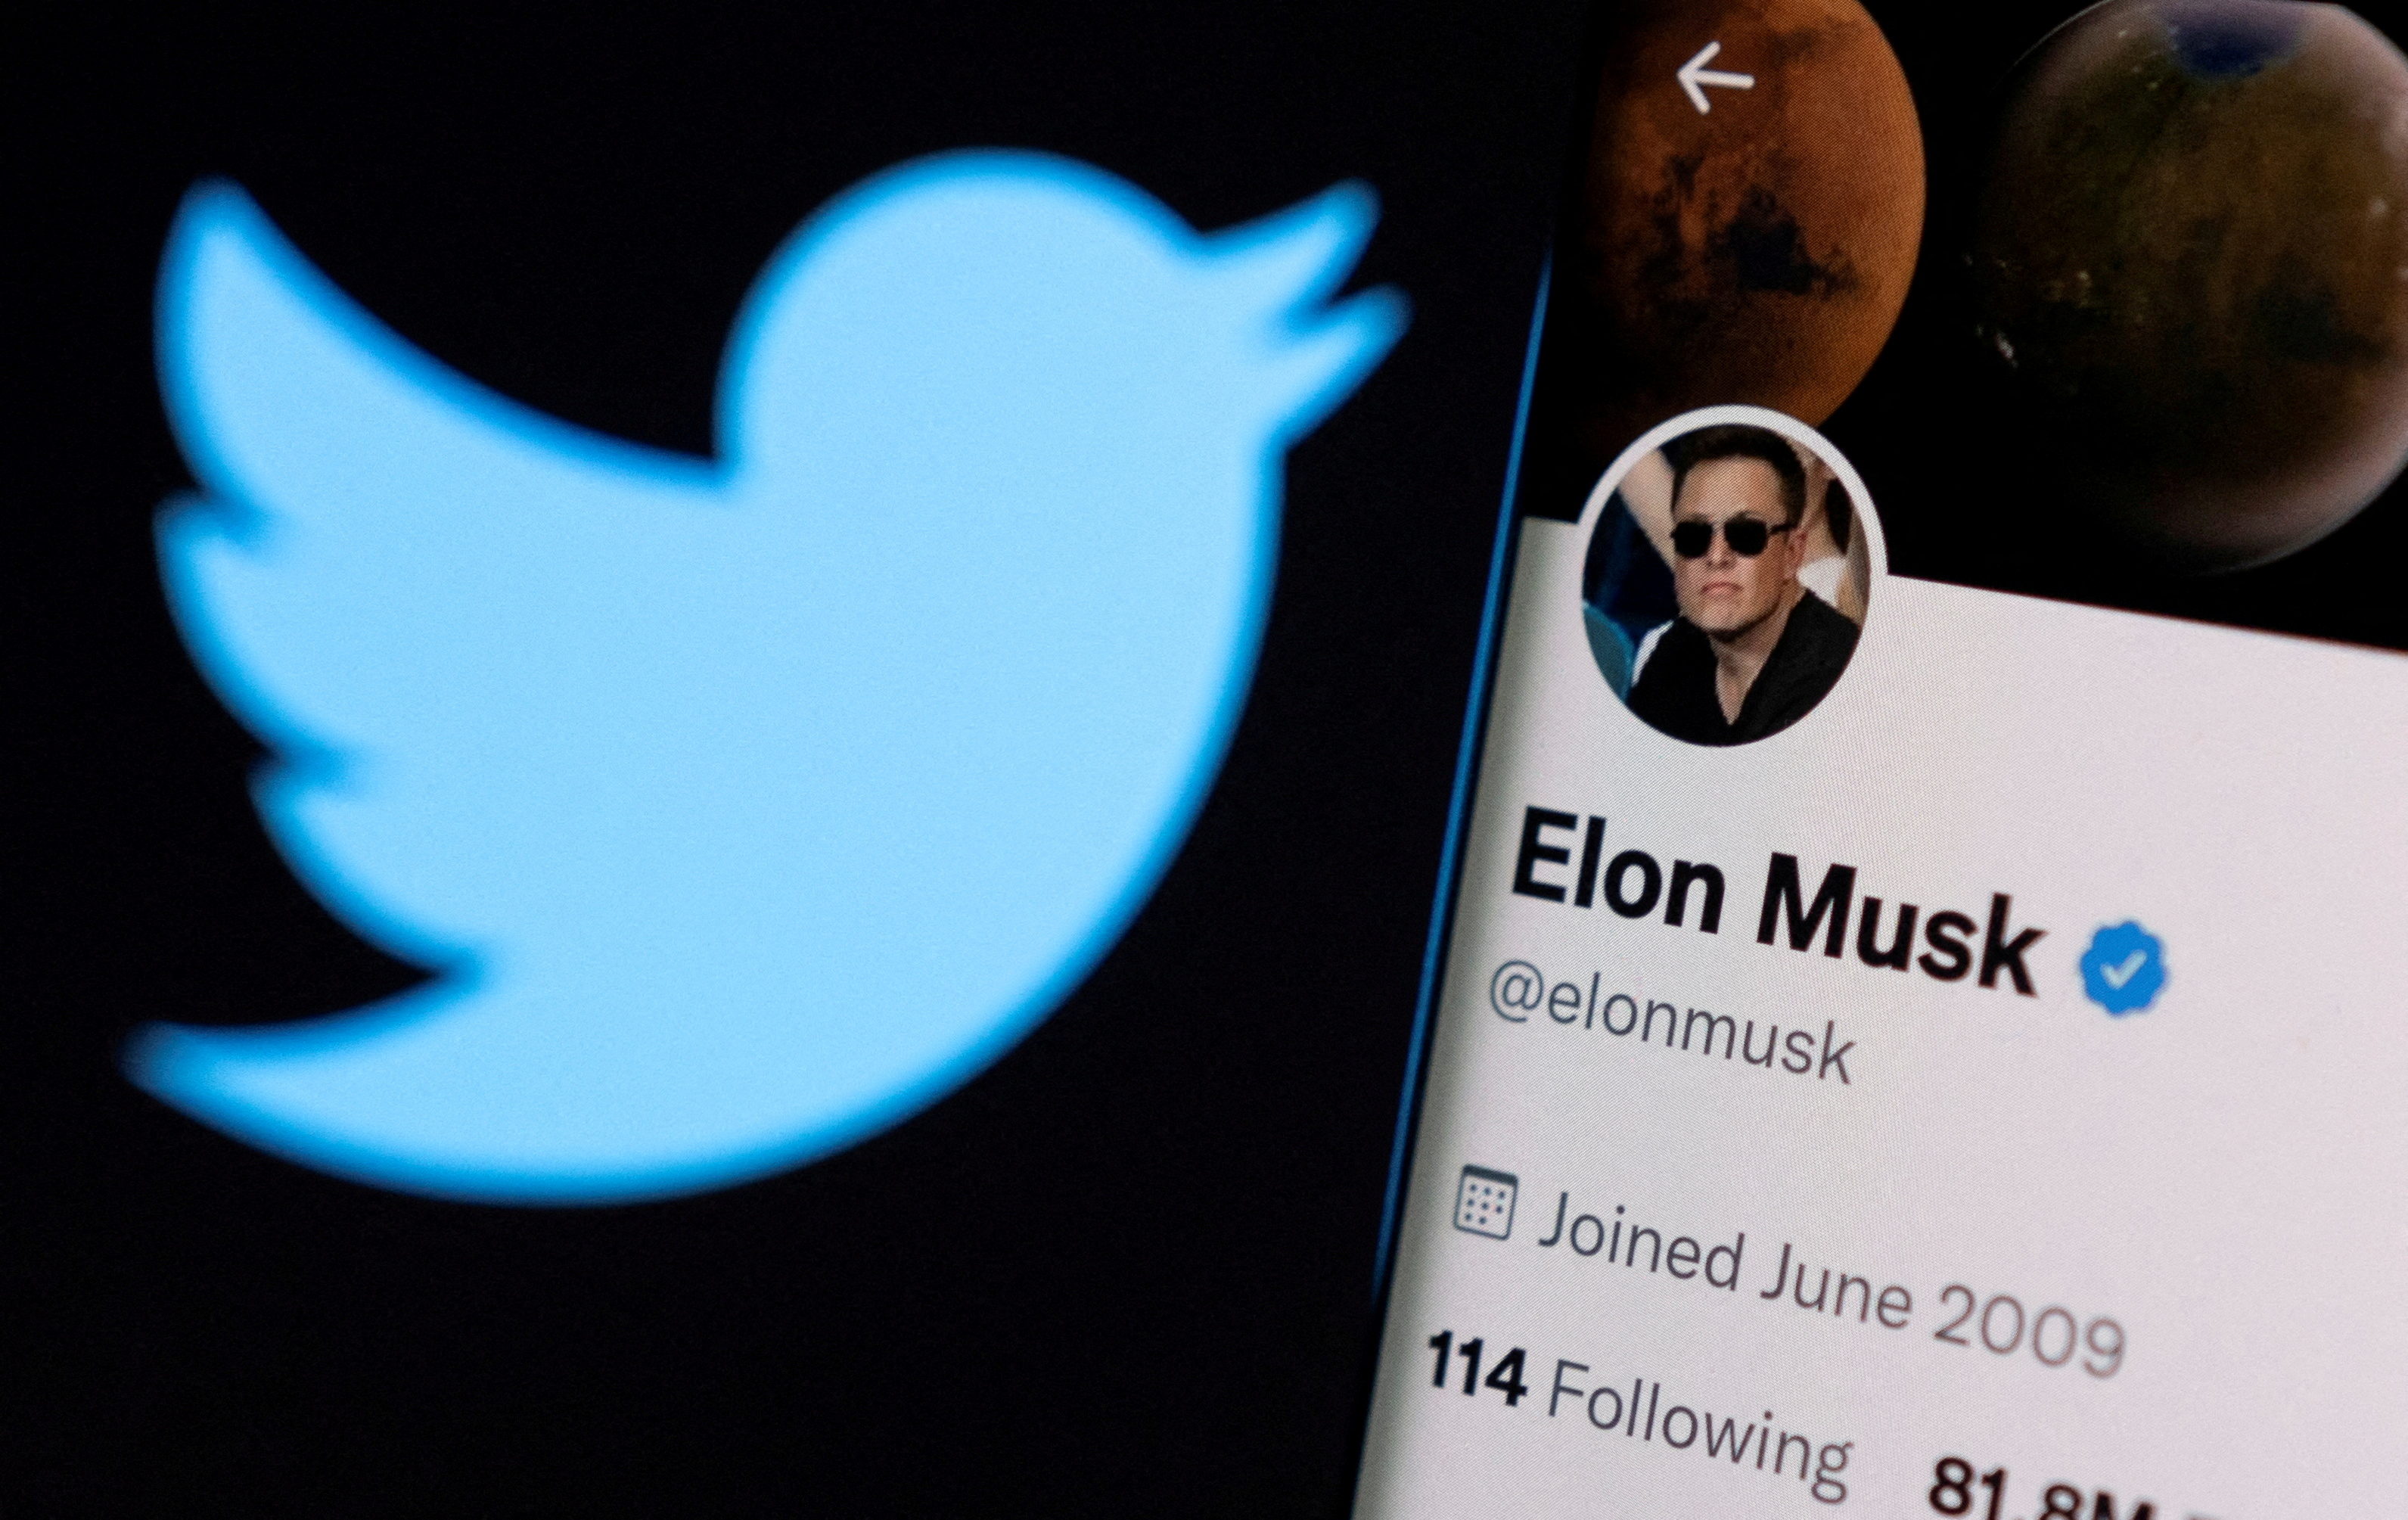 Elon Musk could acquire Twitter for 43 billion dollars (REUTERS/Dado Ruvic/Illustration/File Photo)